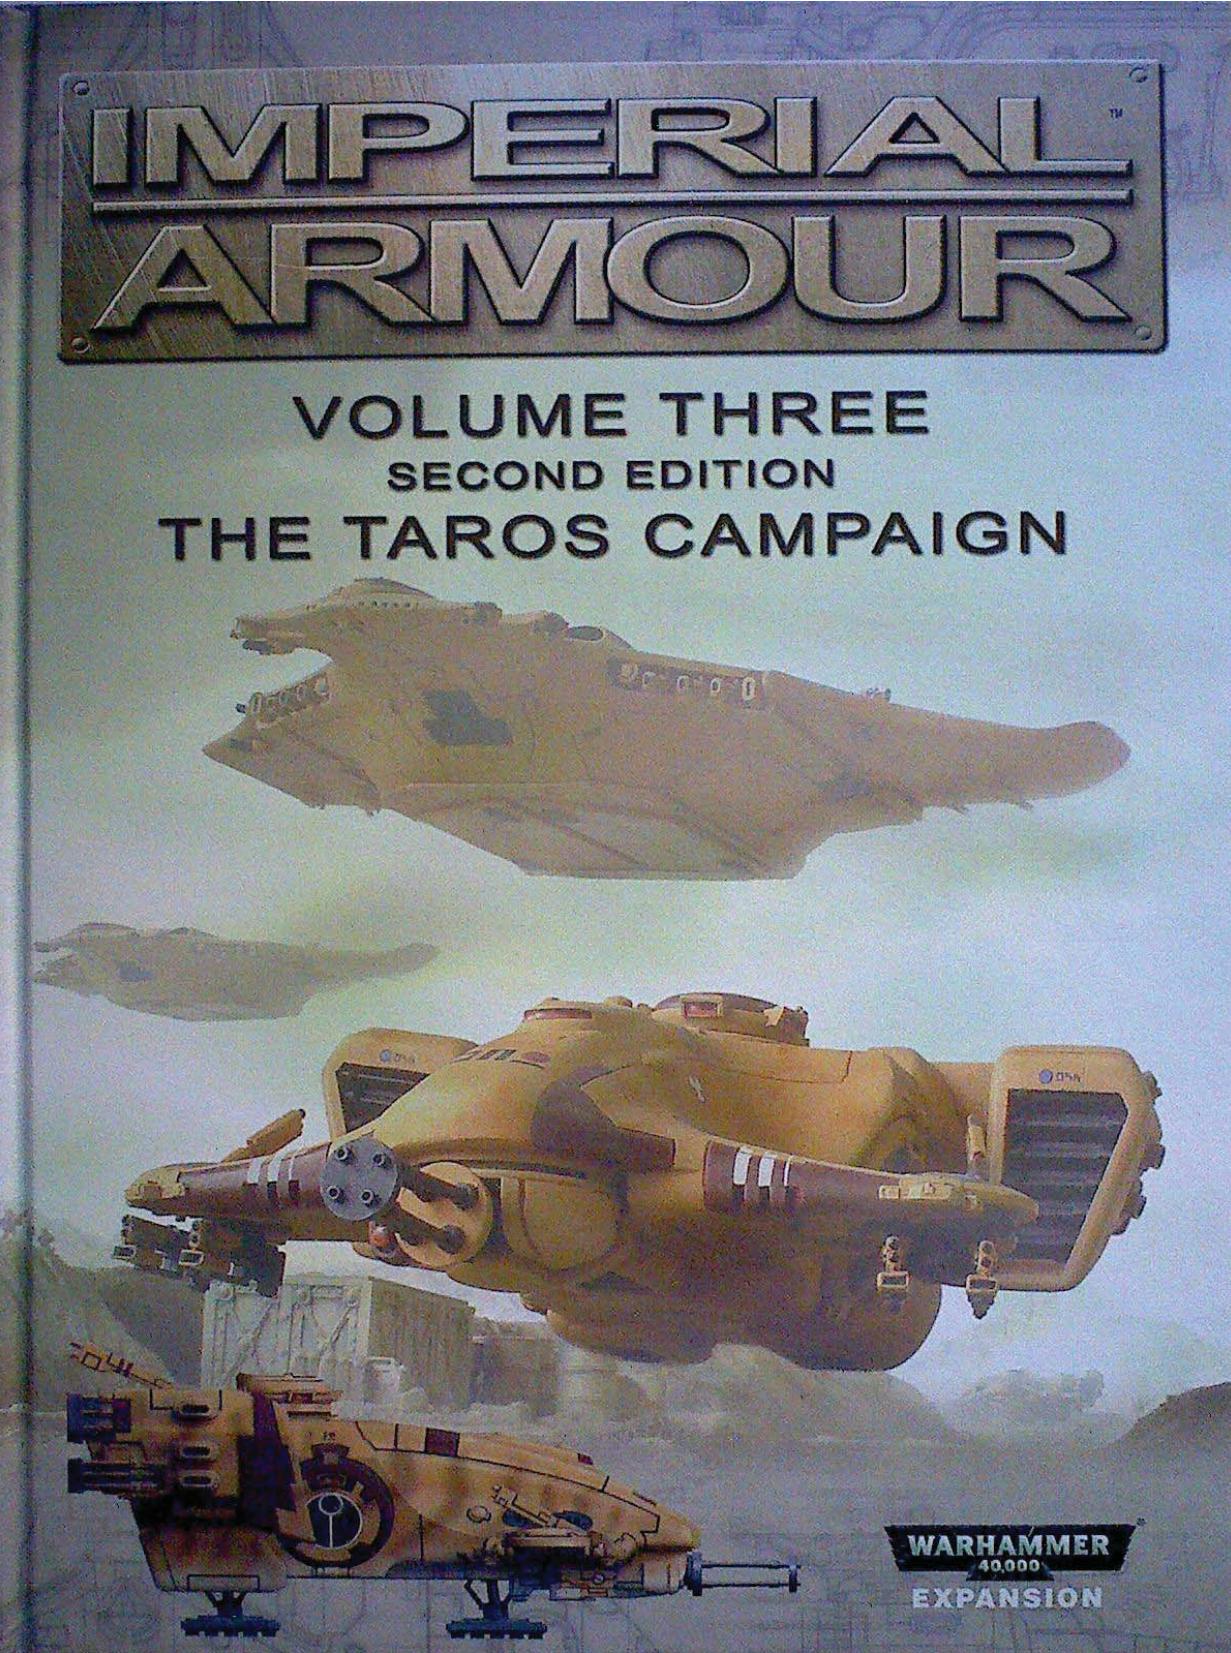 W40k_-_Imperial_Armour,_Vol_3_(2nd_edition)_-_The_Taros_Campaign_(photoscan).pdf